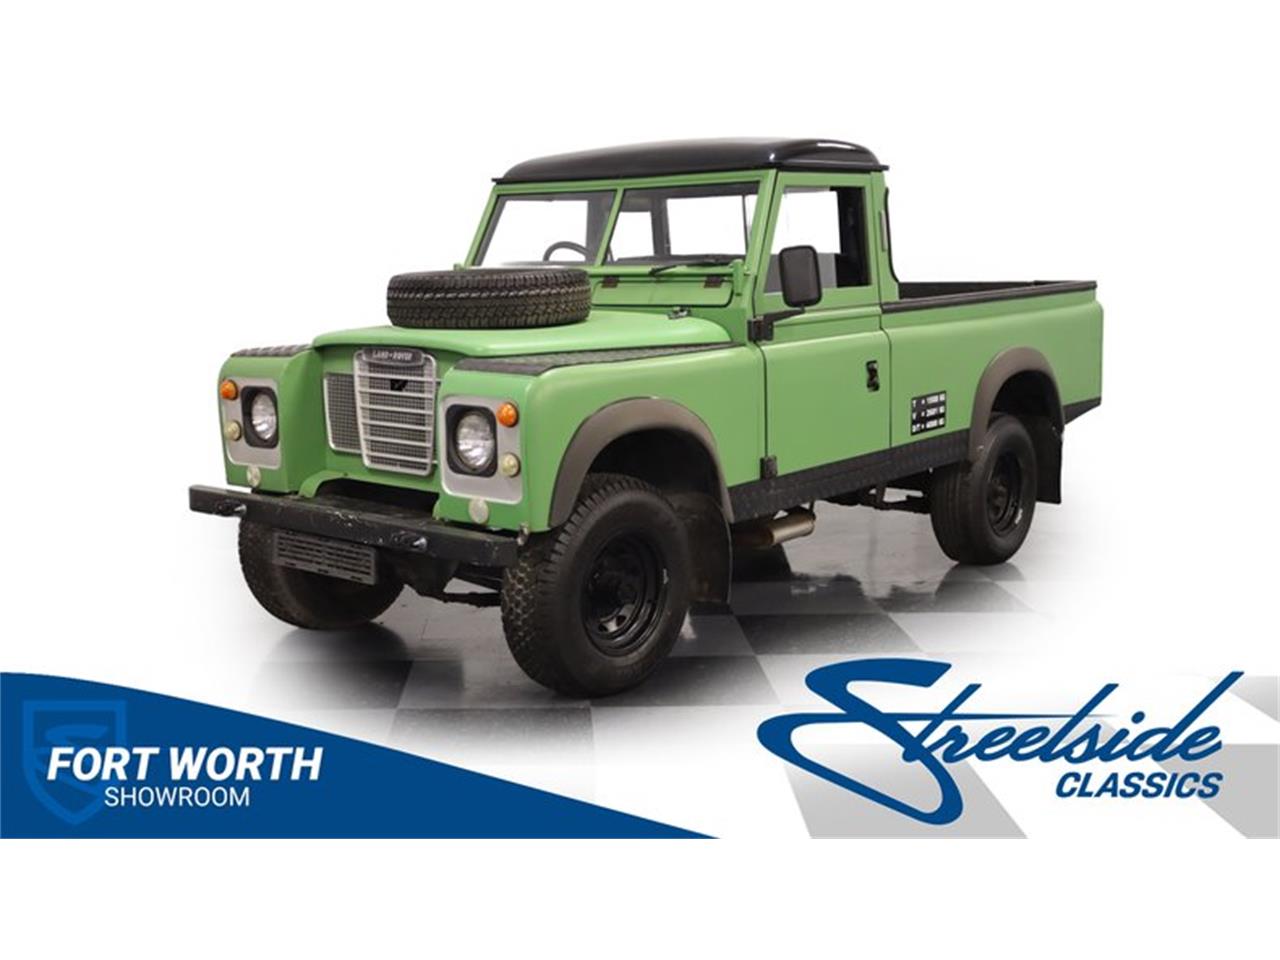 For Sale: 1972 Land Rover Series II in Ft Worth, Texas for sale in Fort Worth, TX